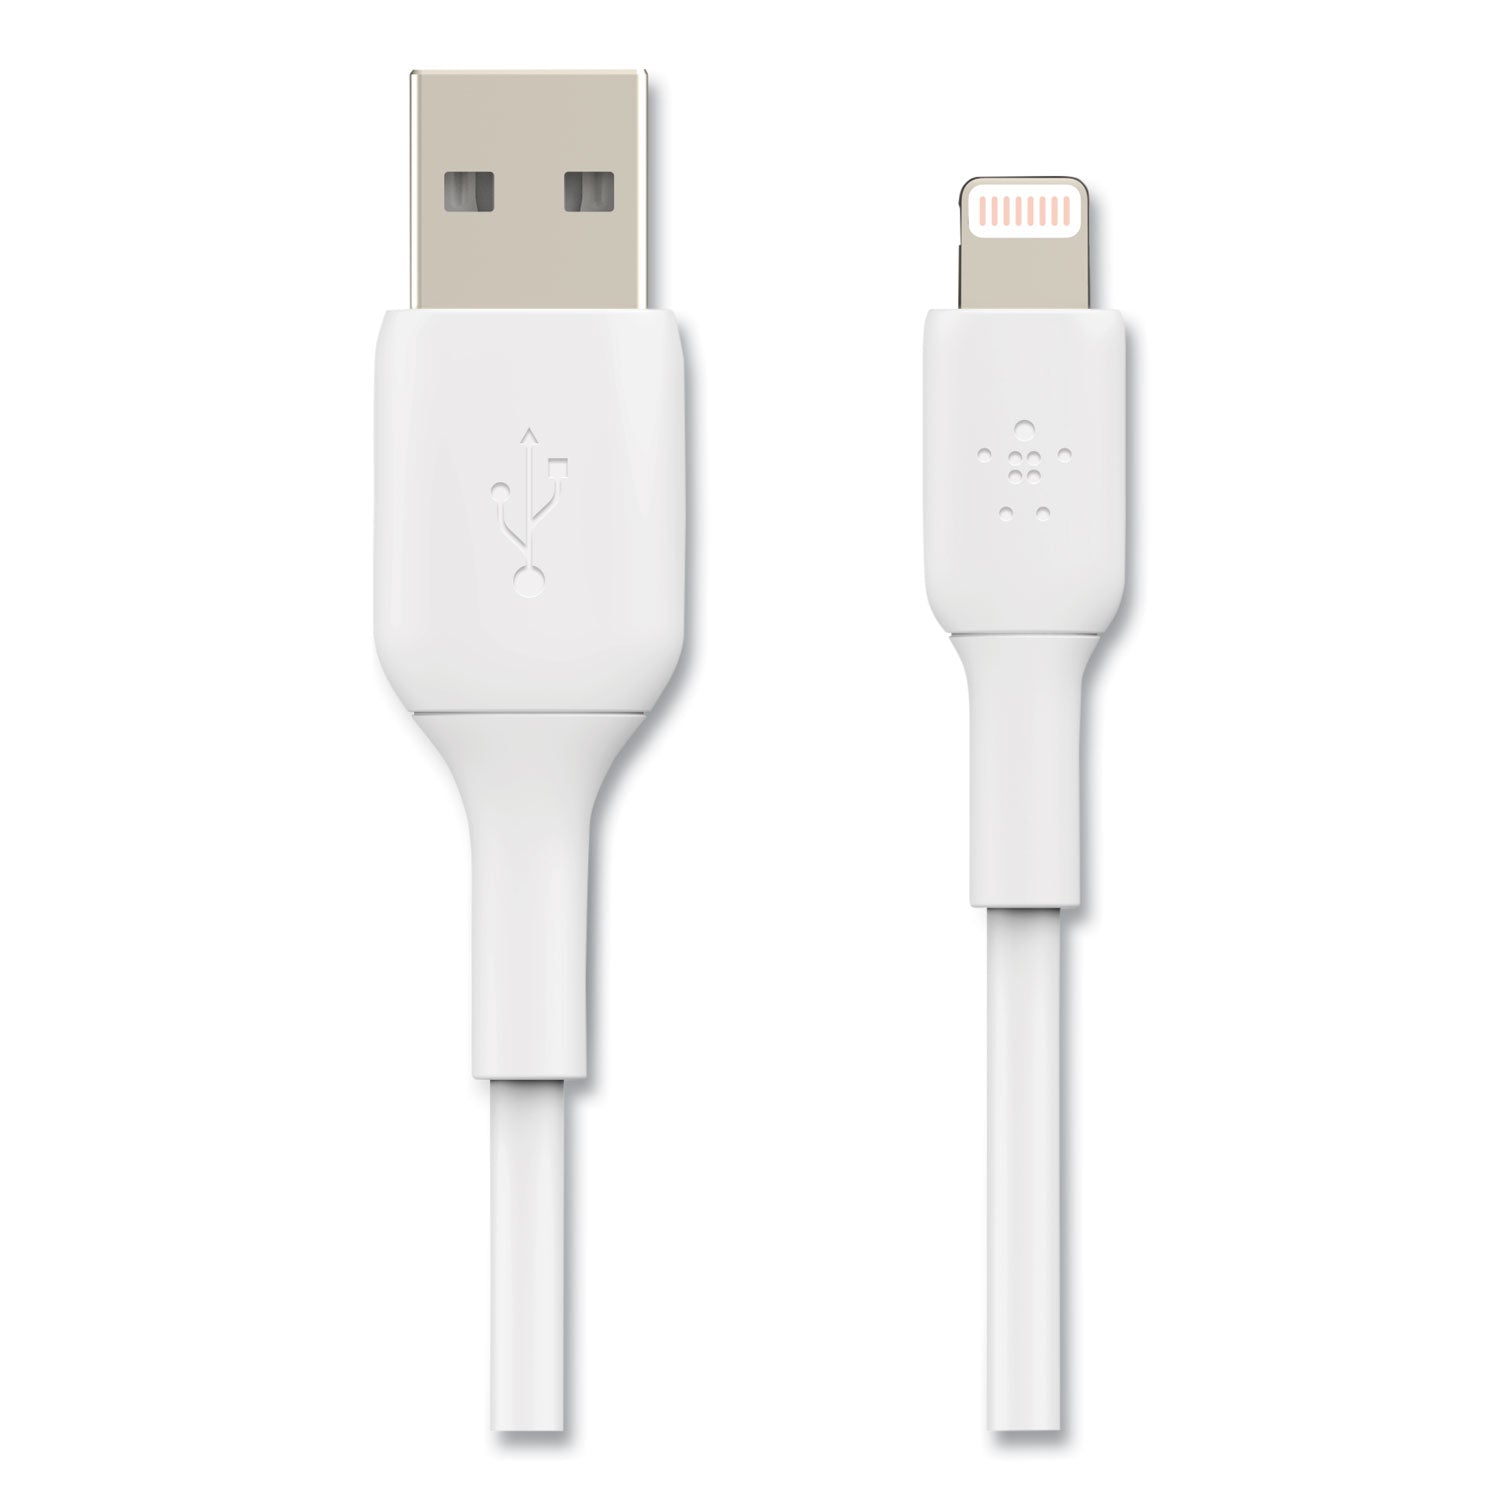 boost-charge-apple-lightning-to-usb-a-chargesync-cable-98-ft-white_blkcaa001bt3mwh - 4